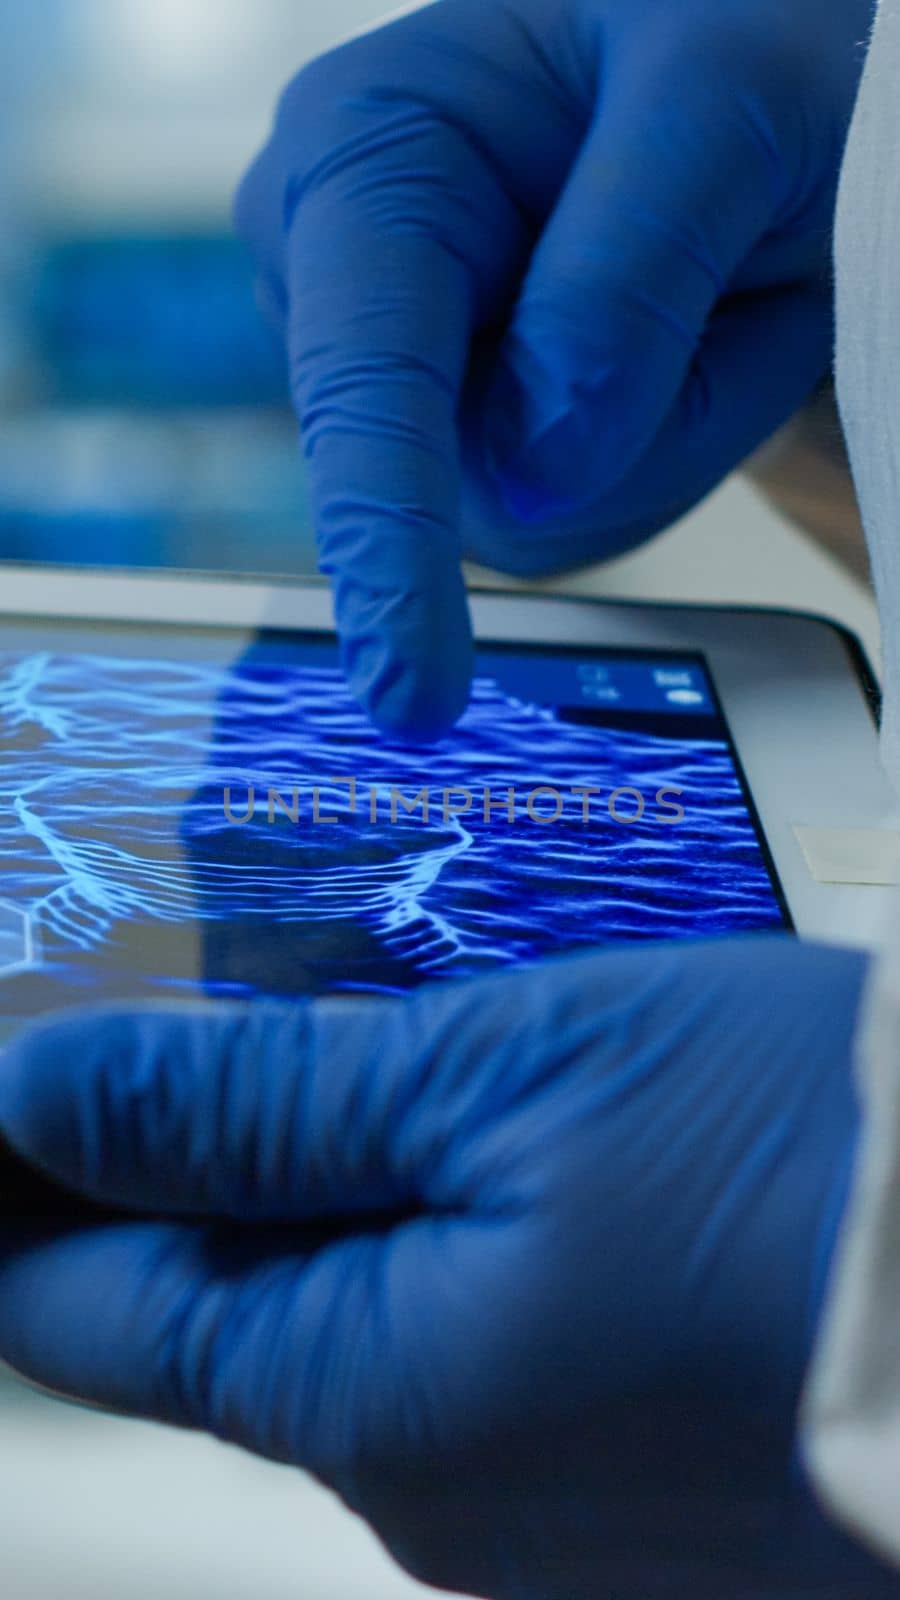 Close up of chemist doctor working on tablet with DNA scan image by DCStudio